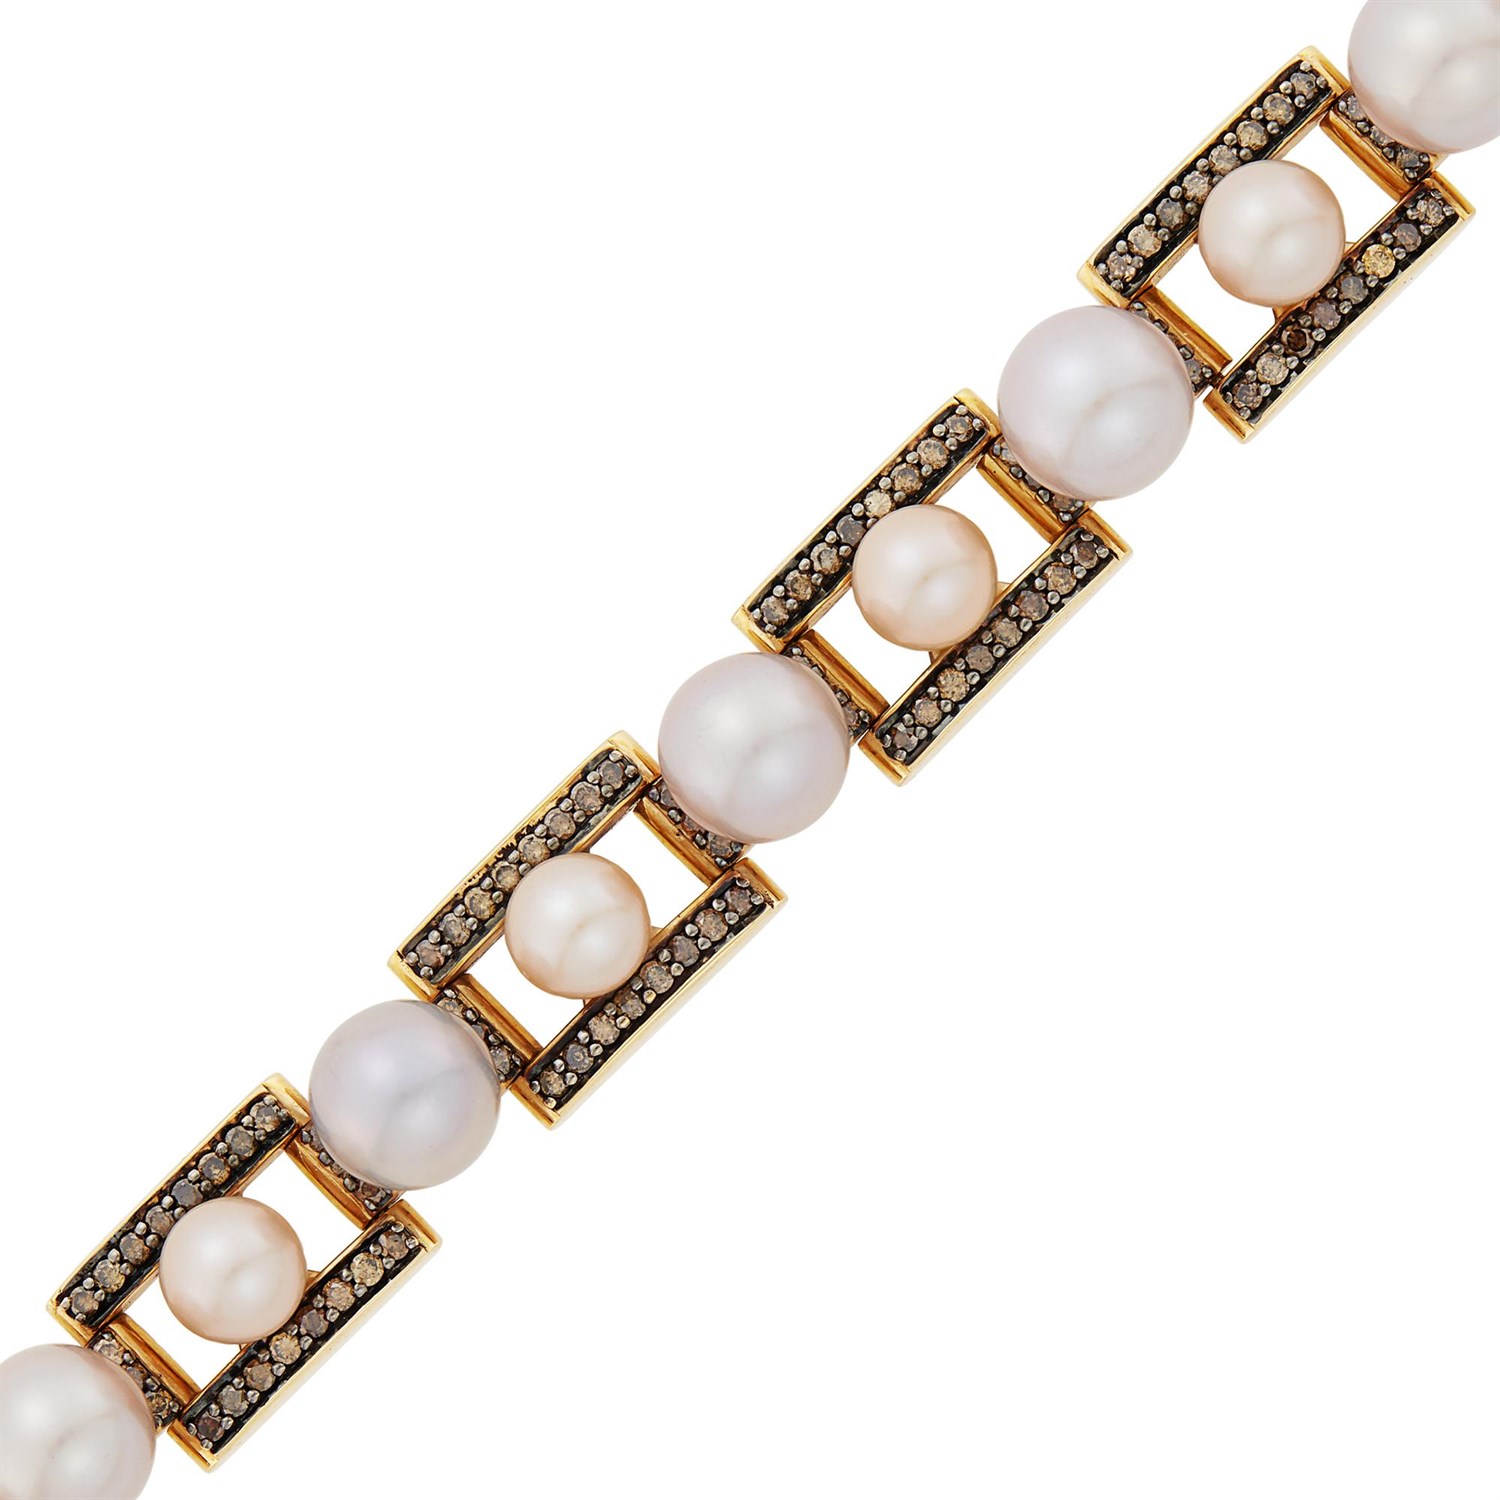 Lot 125 - Gold, Cultured Pearl and Colored Diamond Bracelet